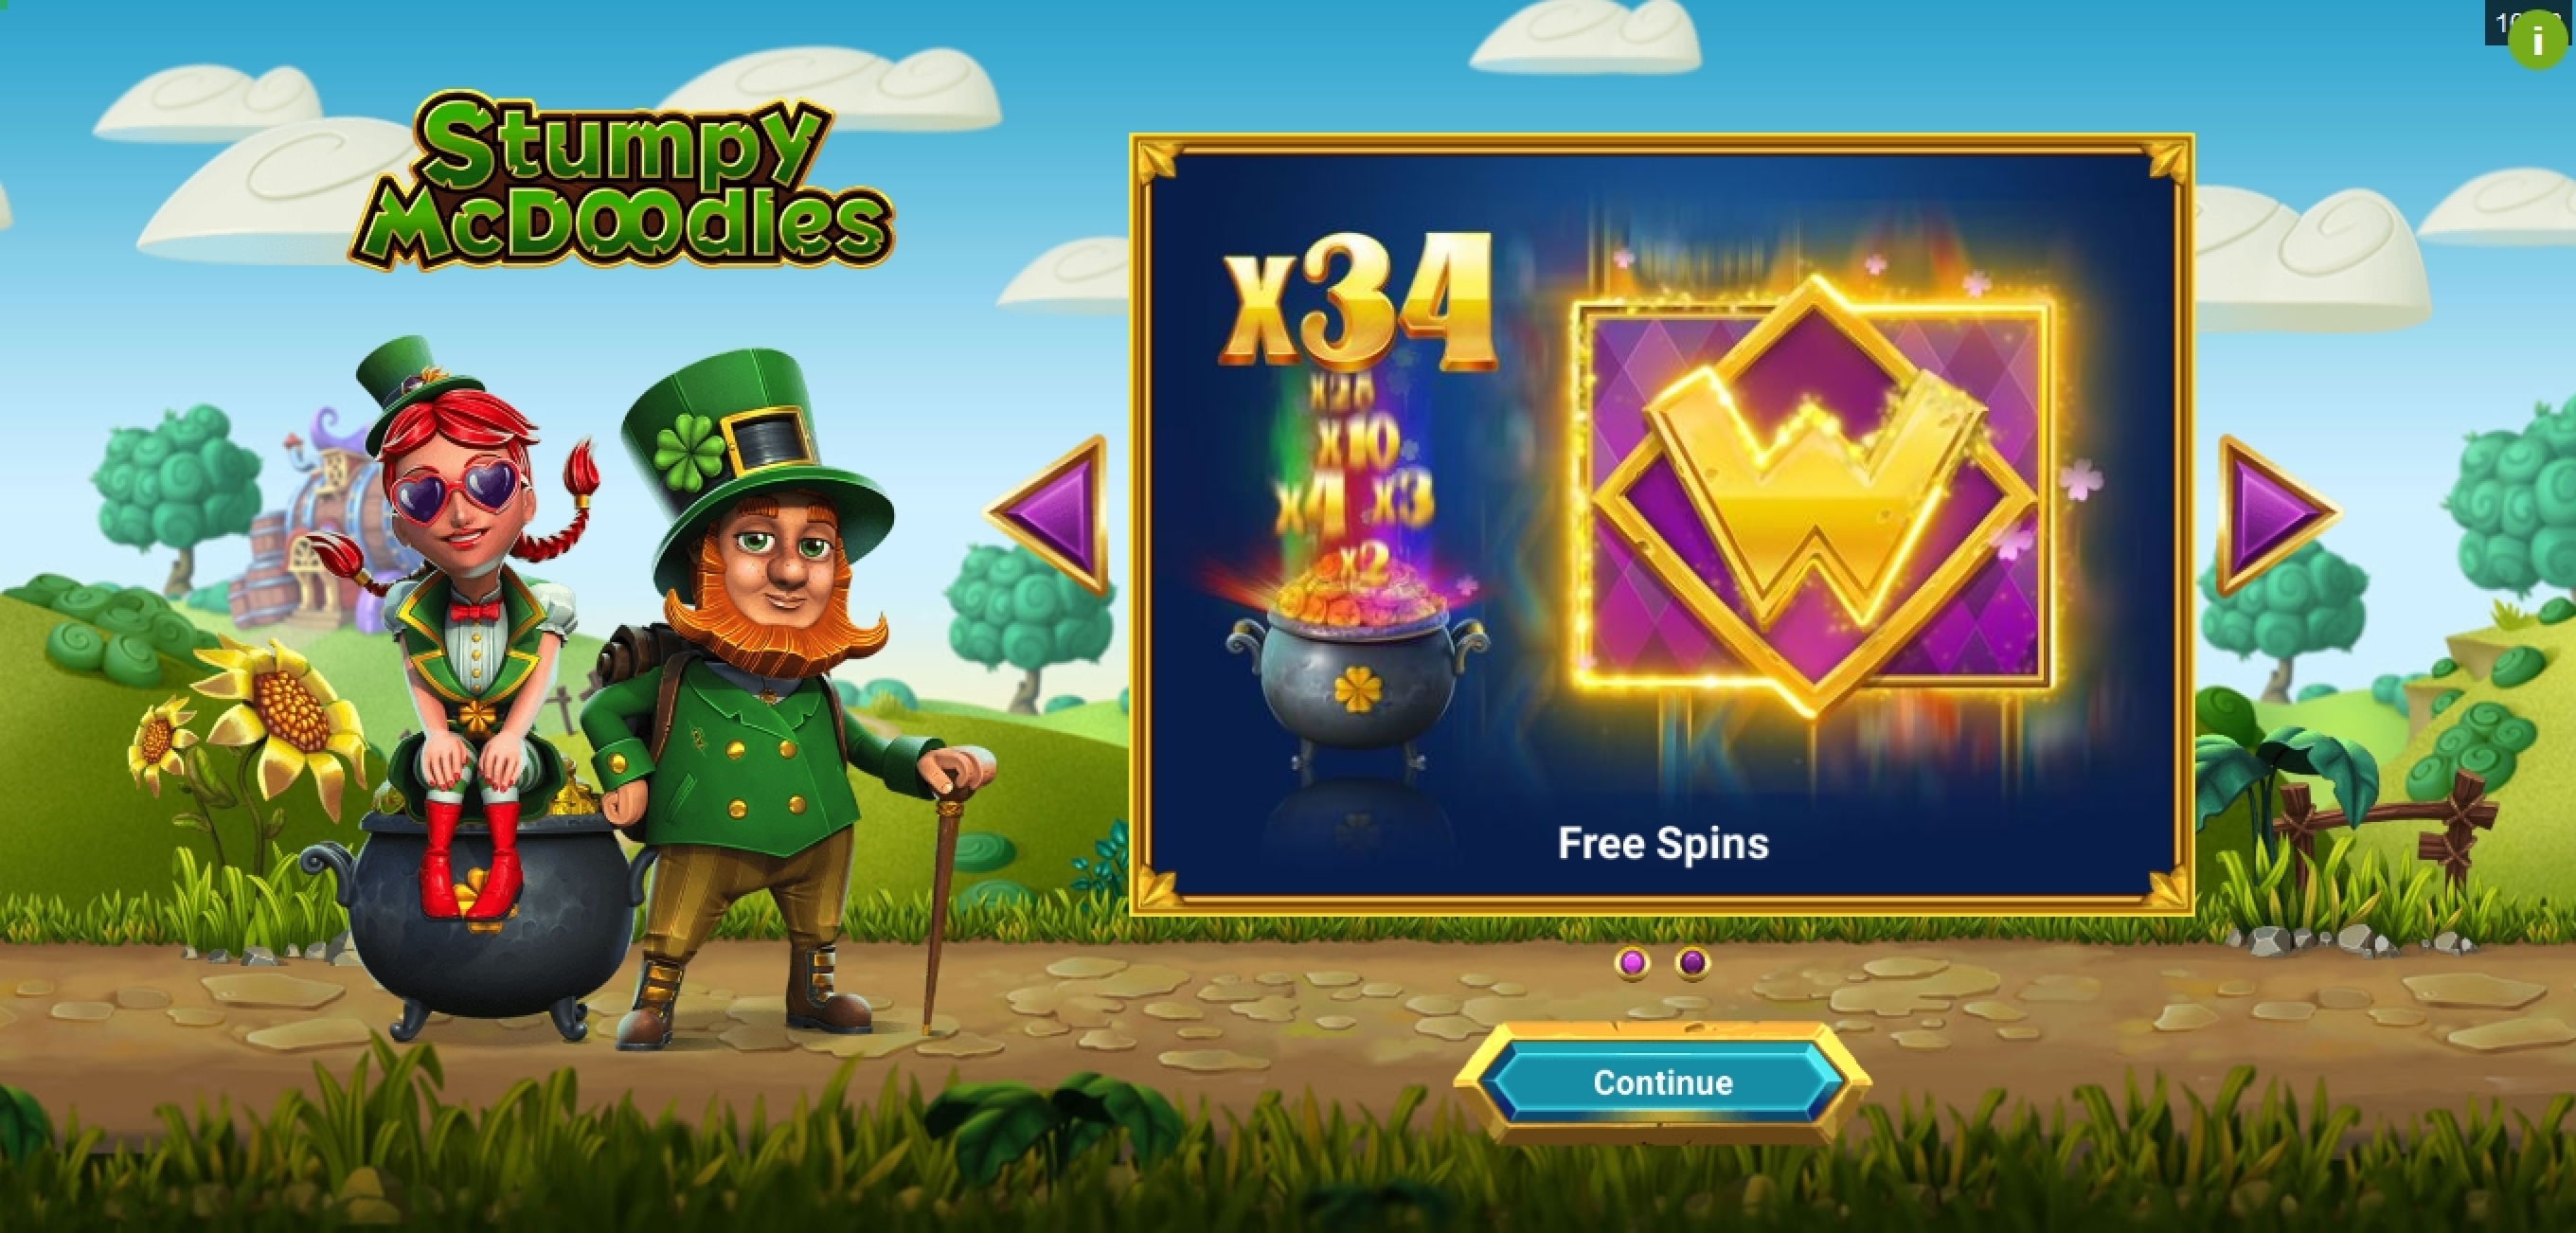 Play Stumpy McDoodles Free Casino Slot Game by Foxium